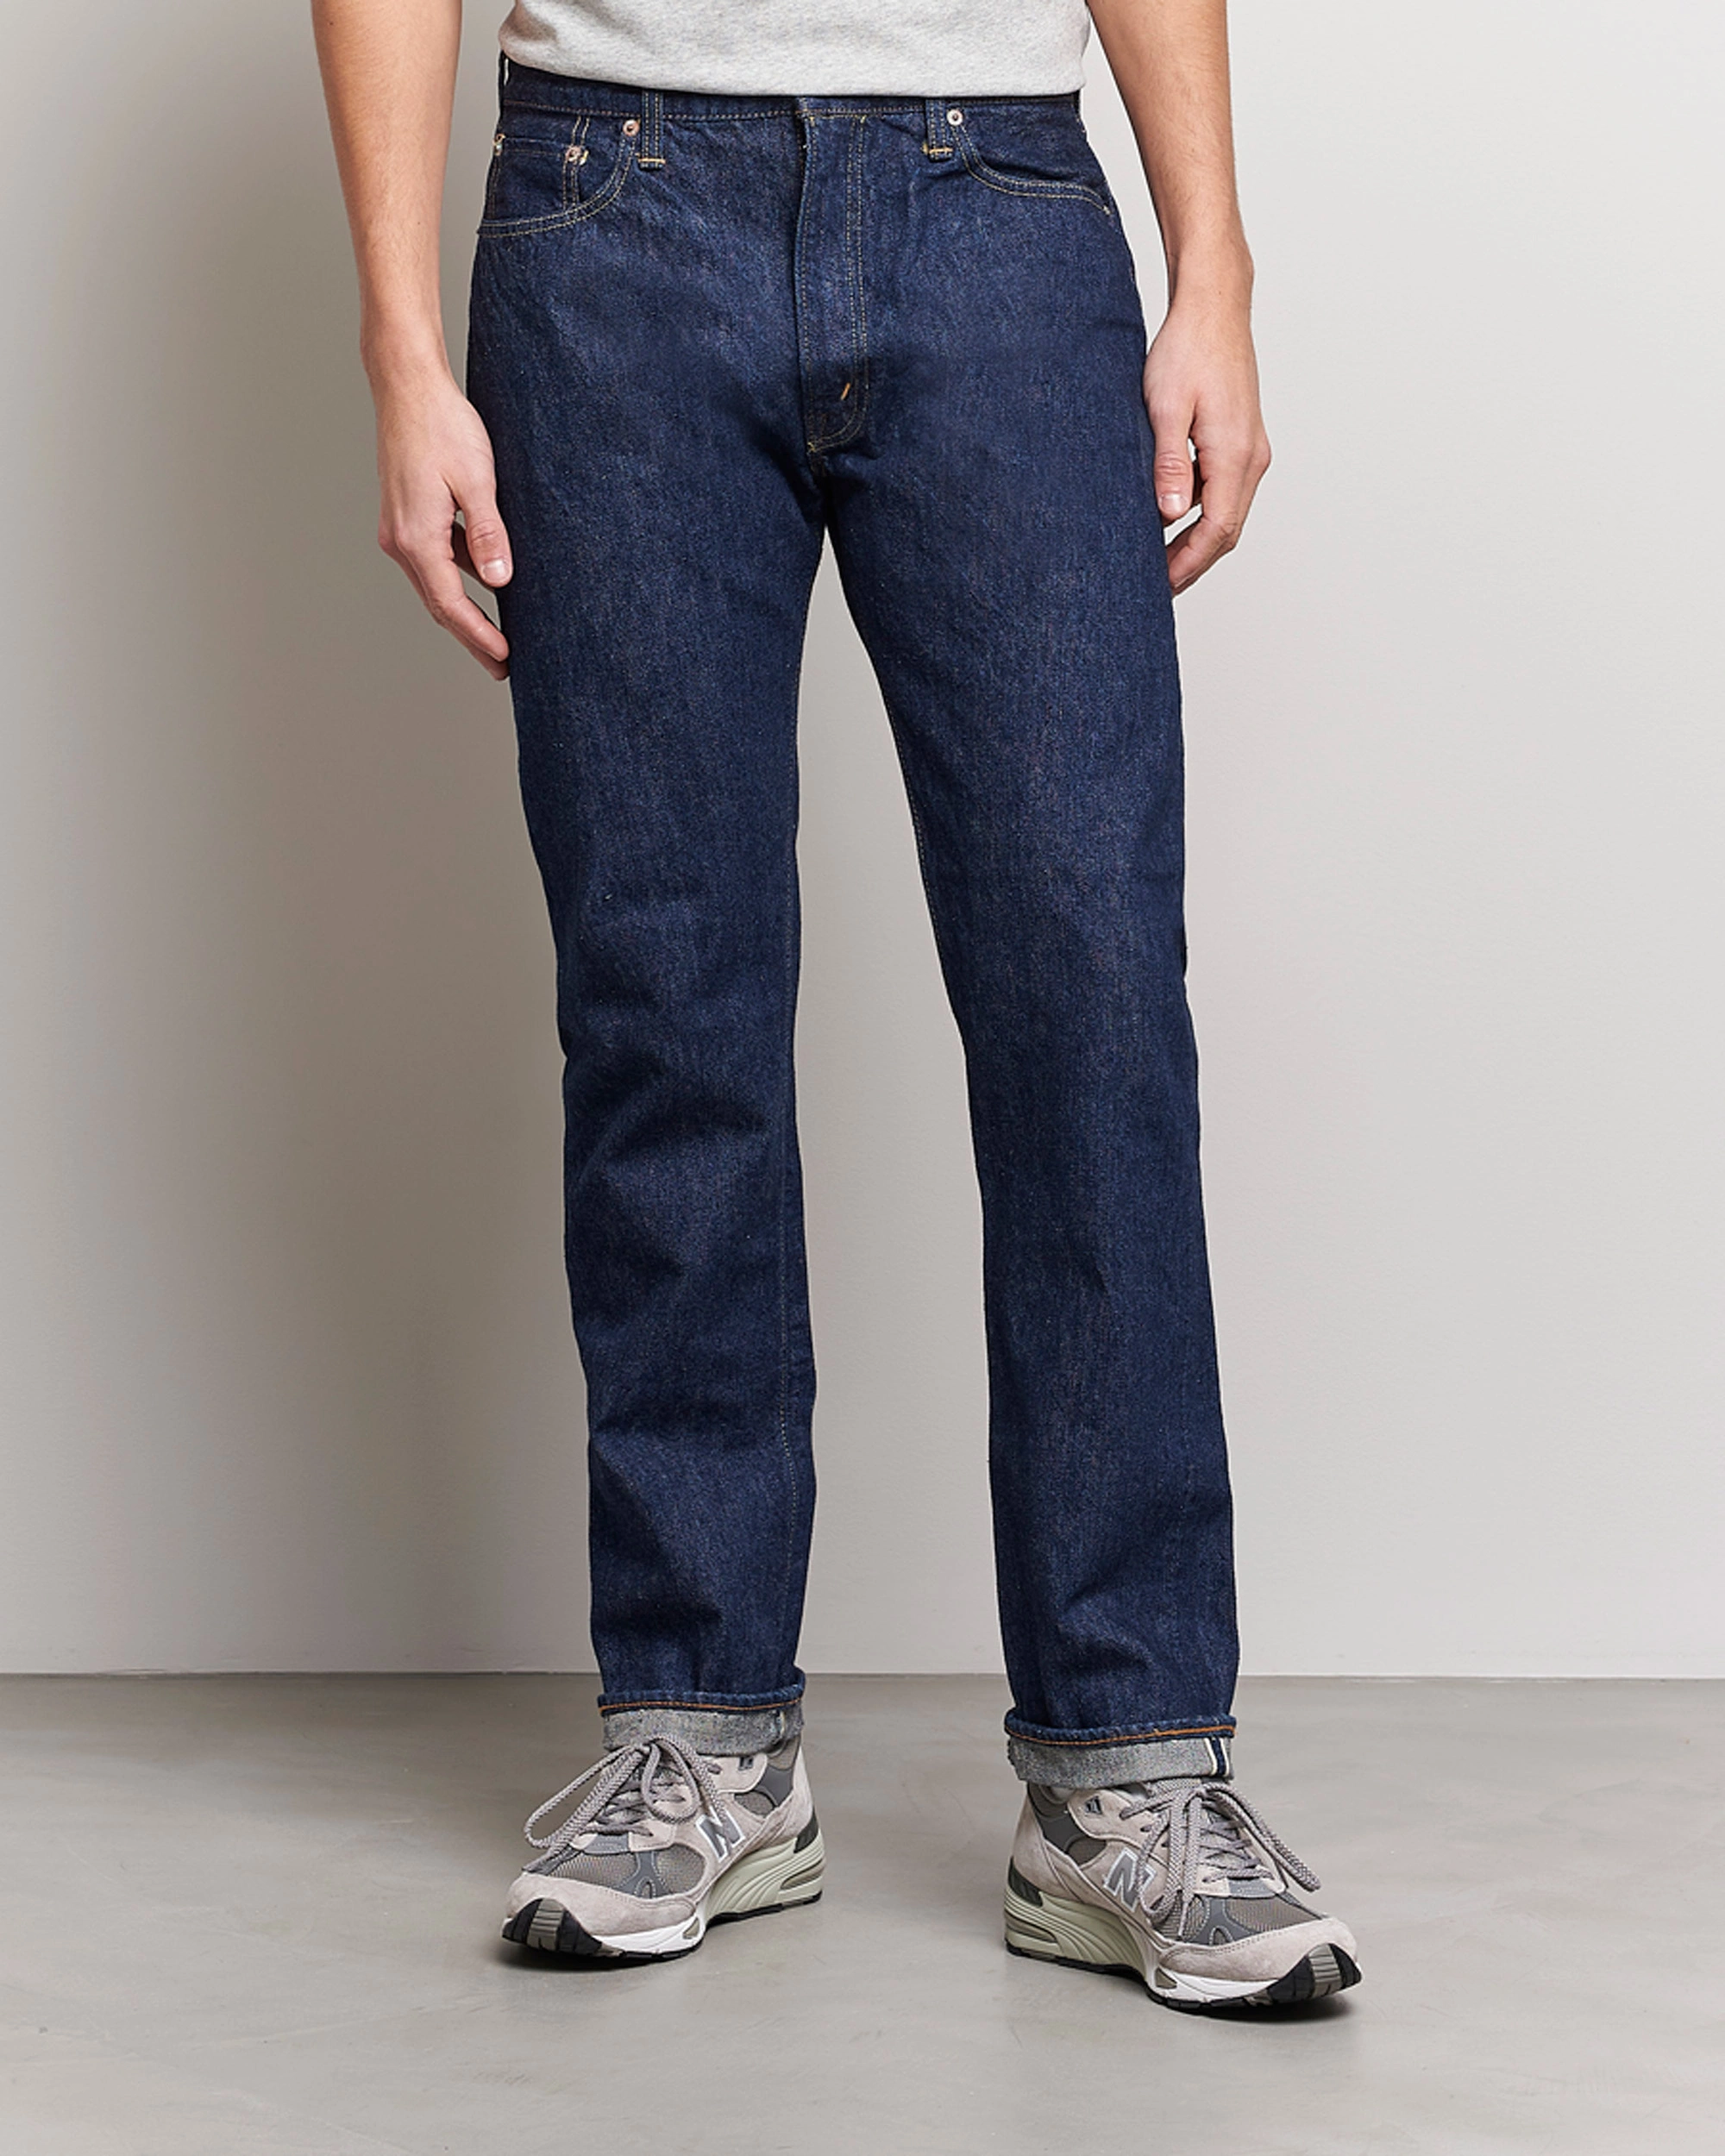 Mies |  | orSlow | Tapered Fit 107 Selvedge Jeans One Wash